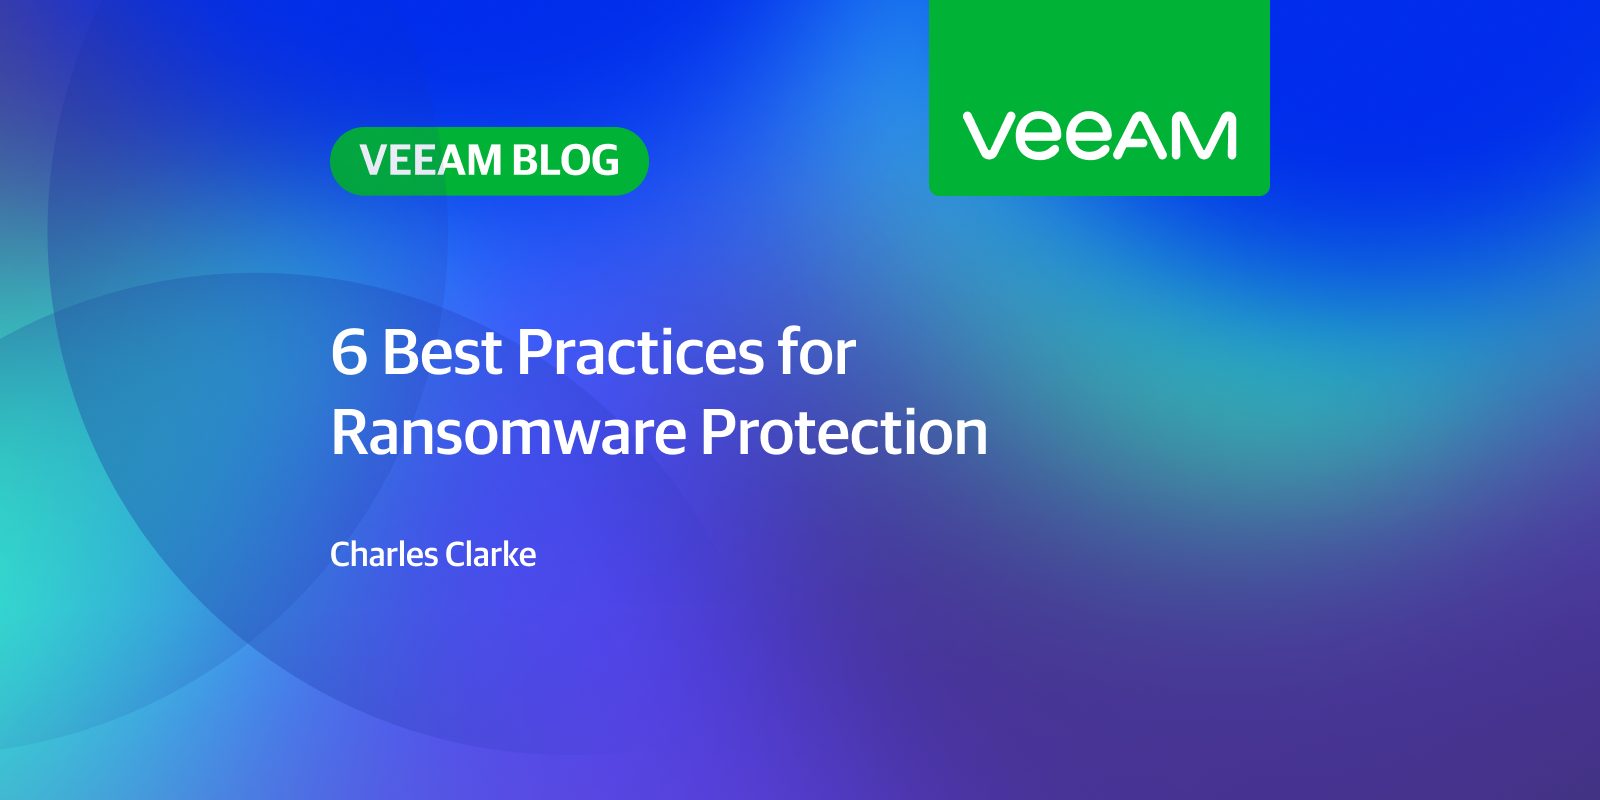 6 Best Practices for Ransomware Protection